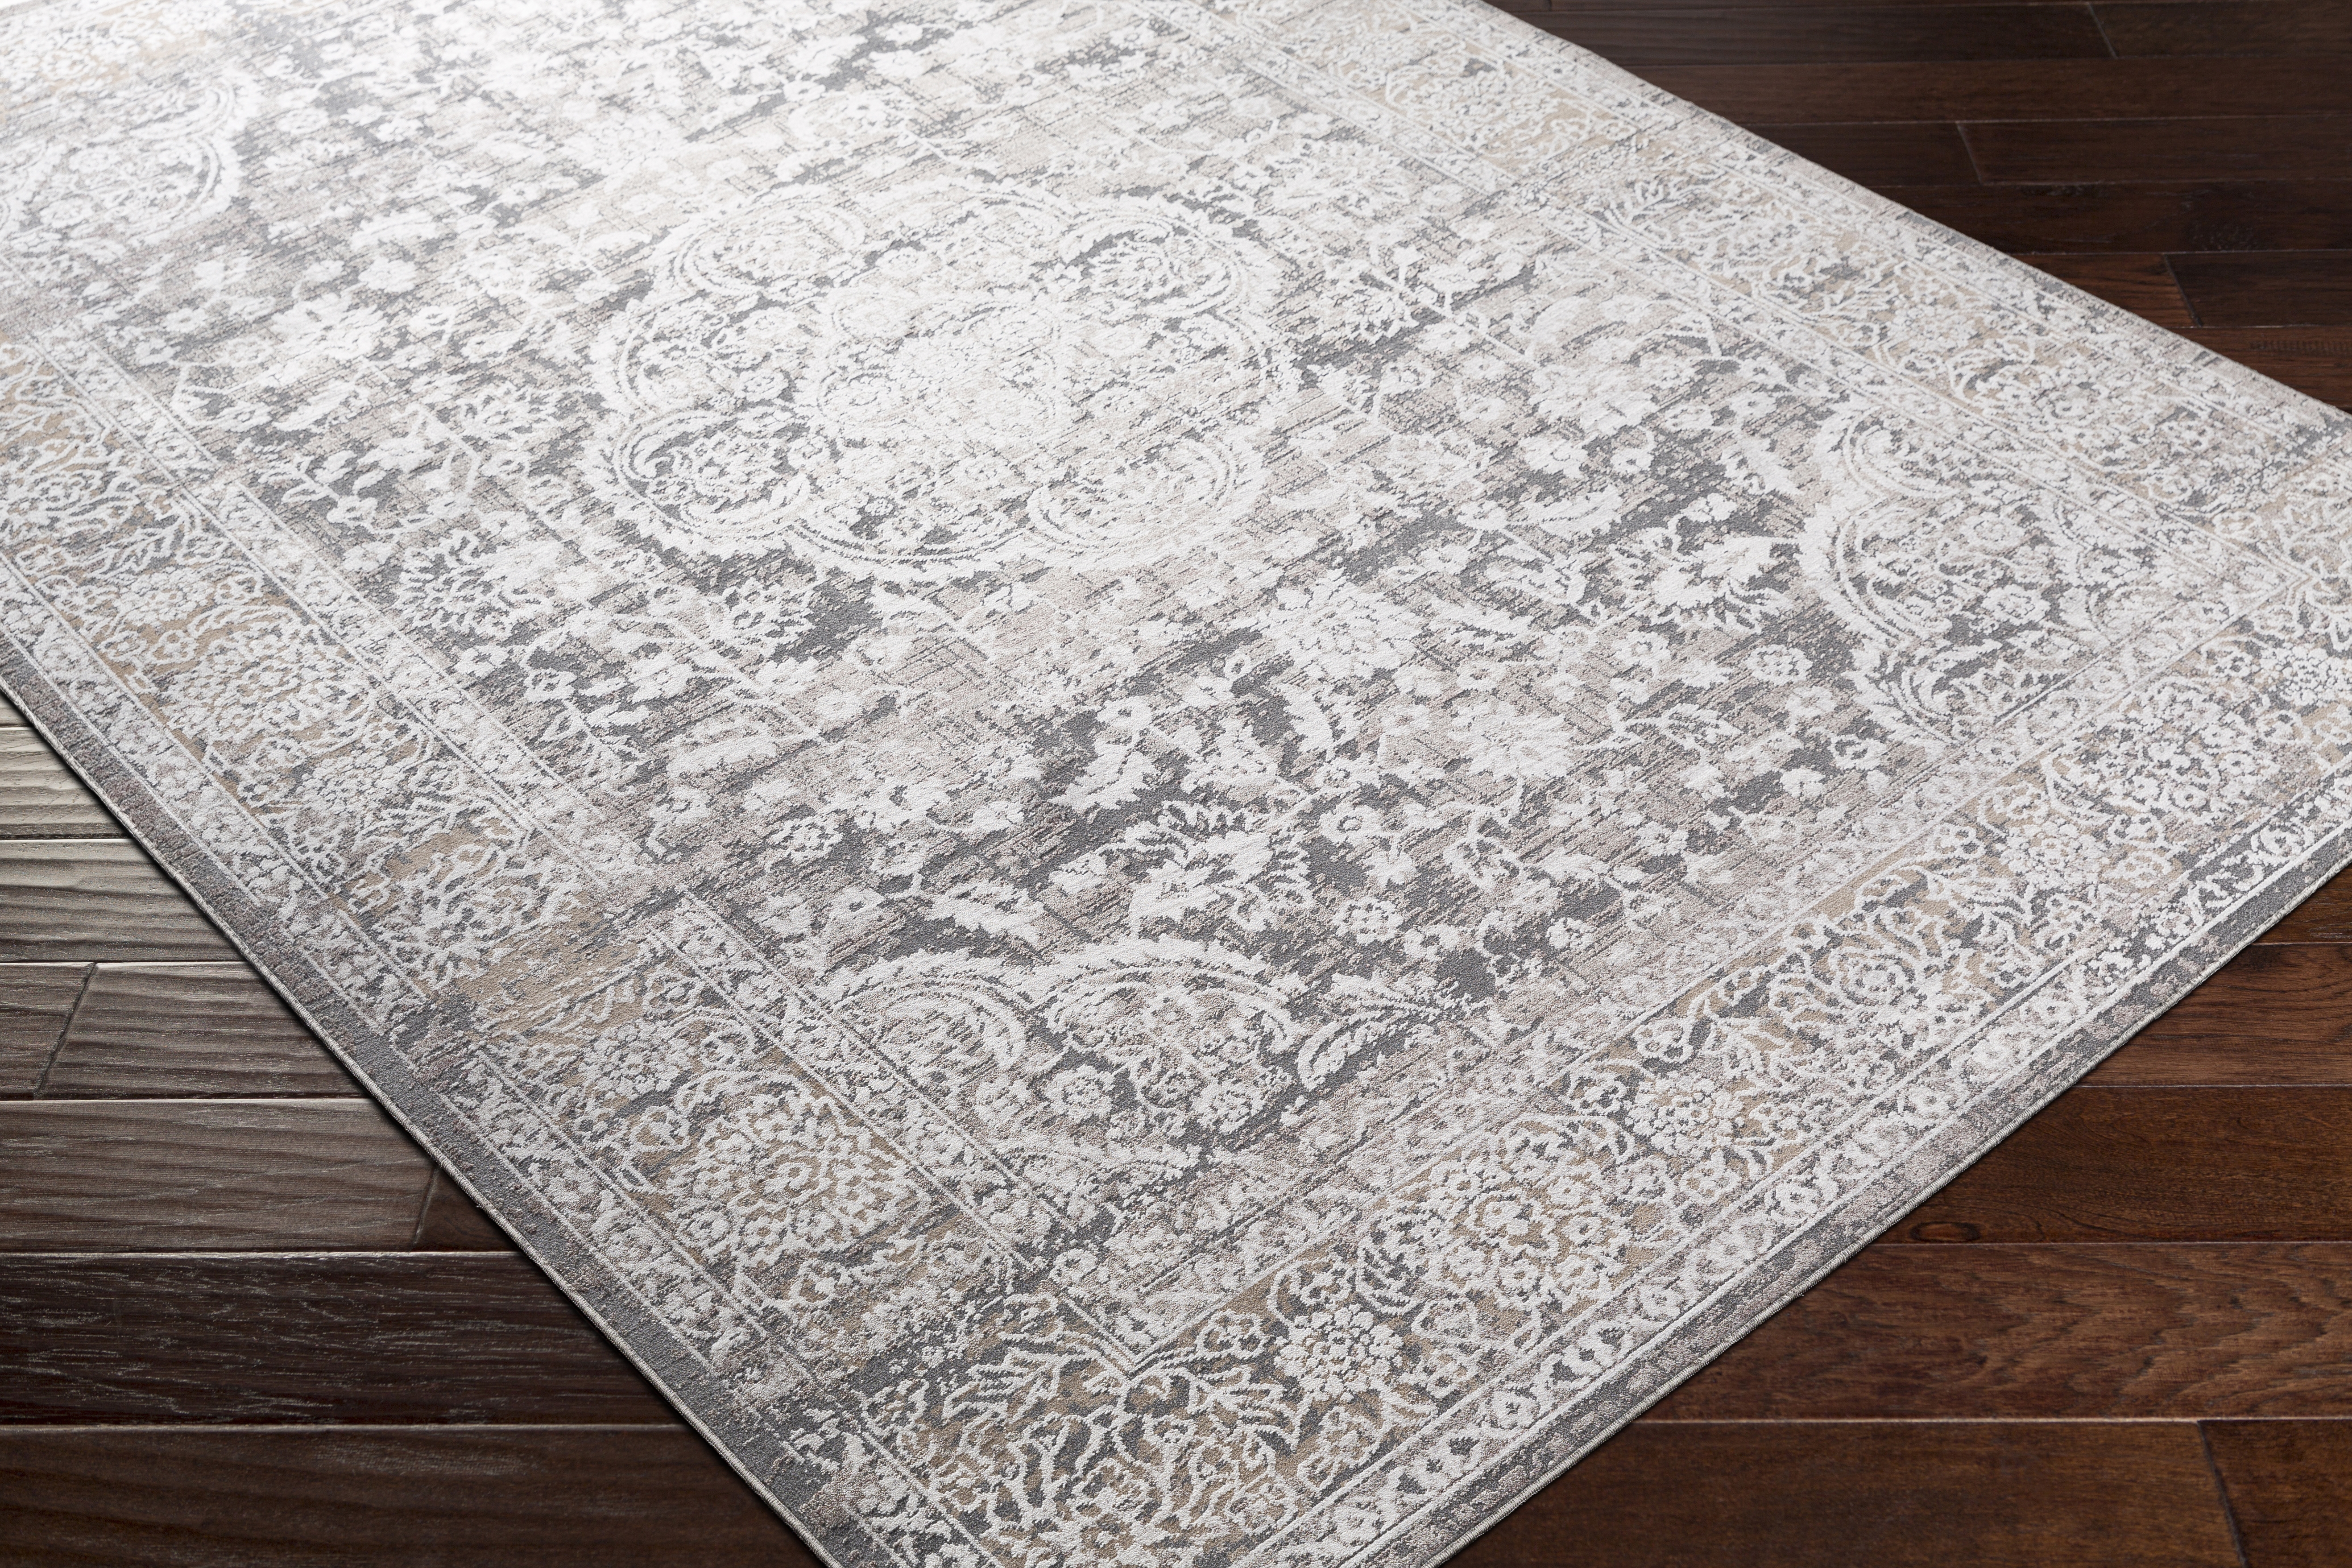 Couture Rug, 7'10" x 10'3" - Image 2